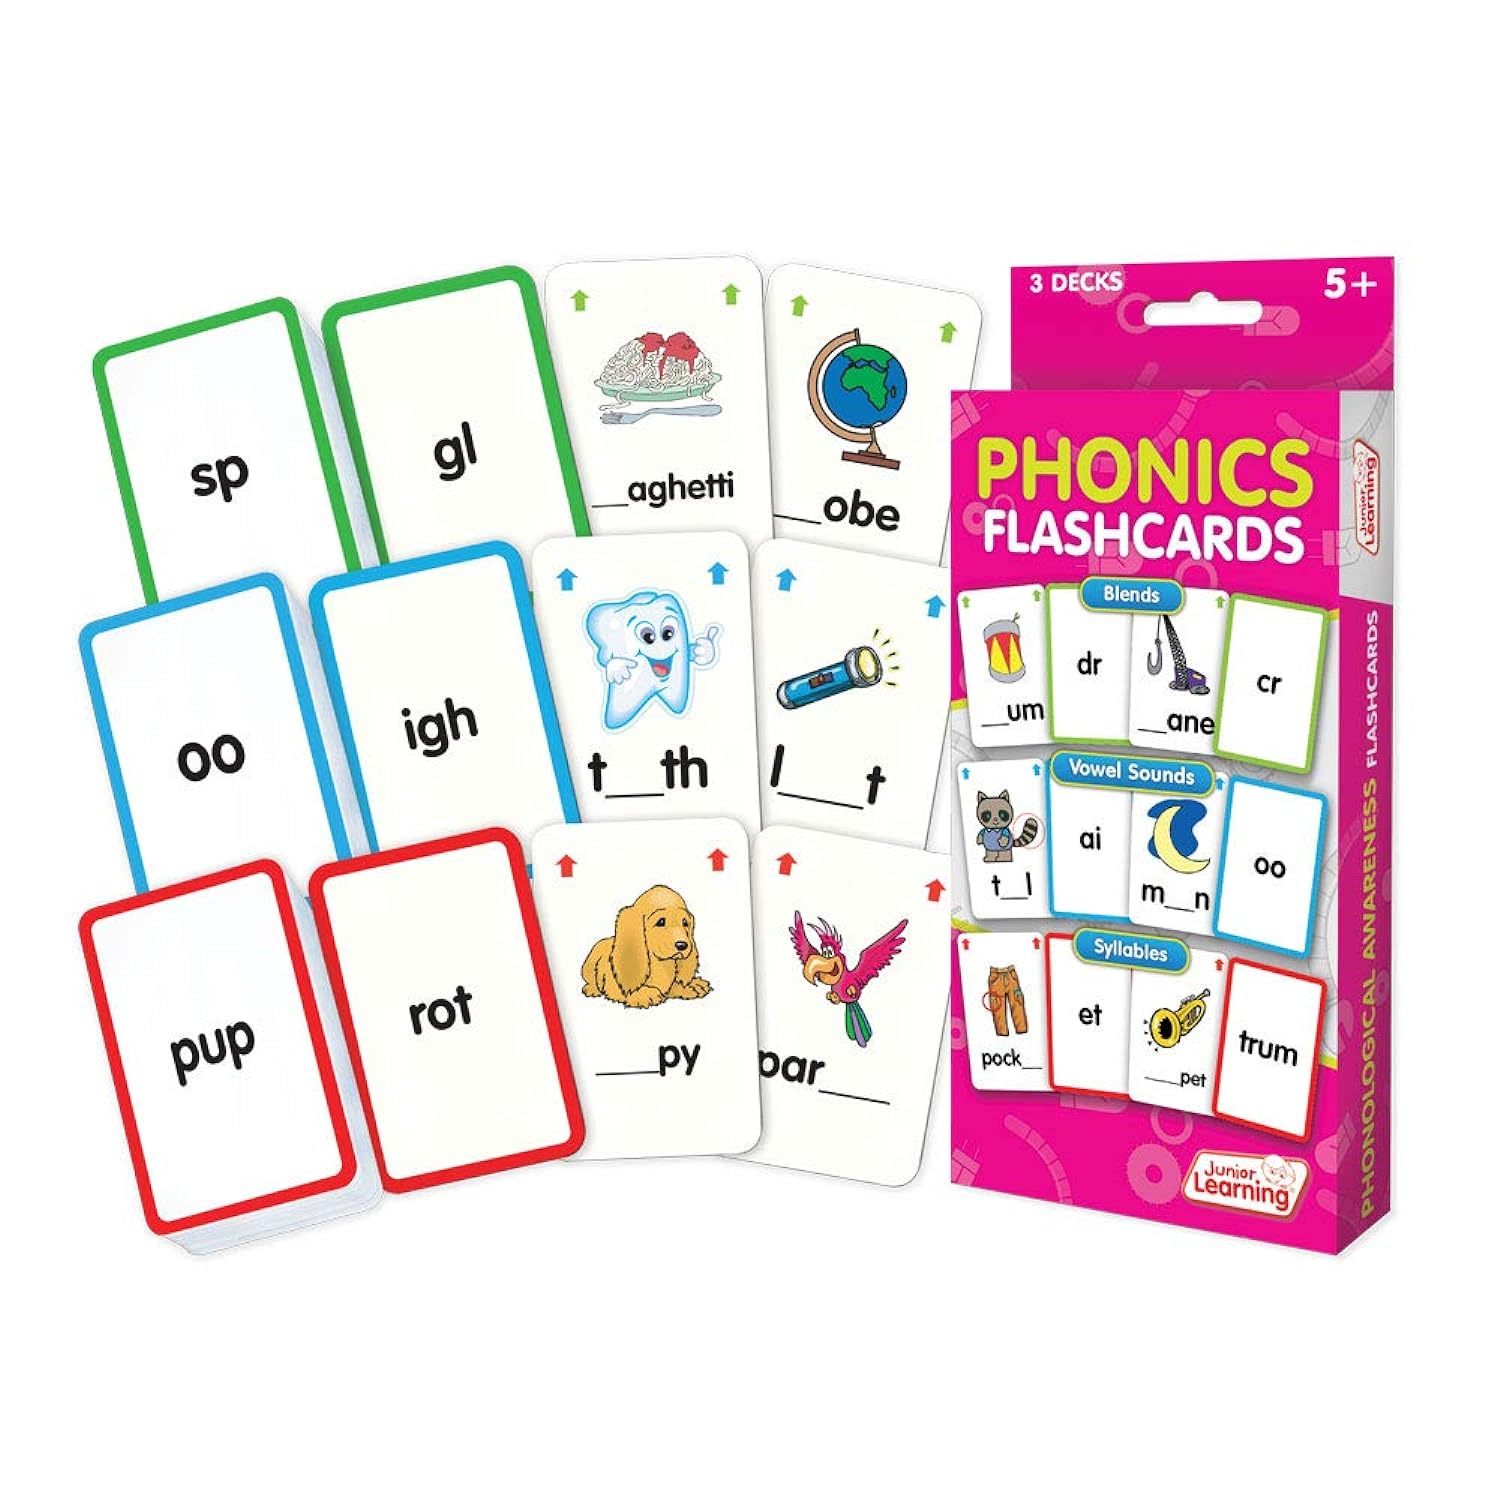 Wooden Numbers for Learning Games, Educational Tool (Rainbow